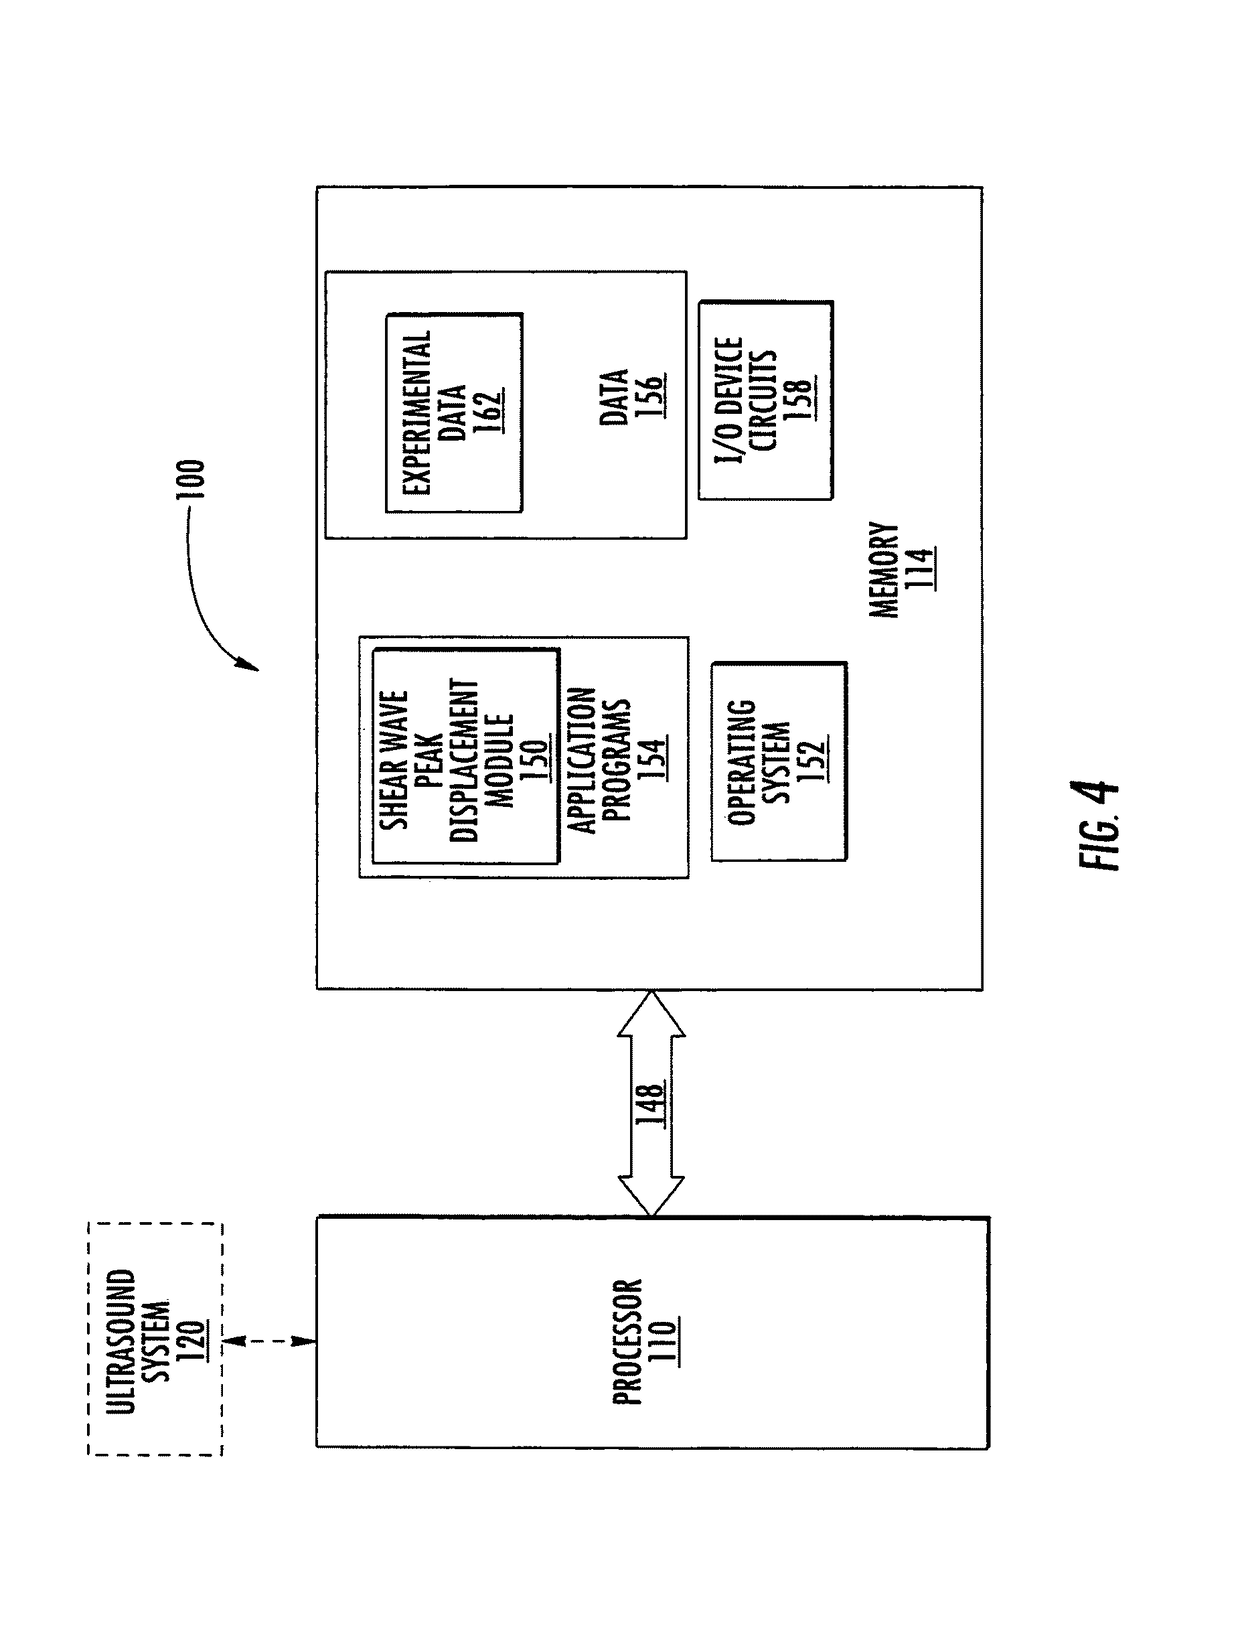 Methods, systems and computer program products for ultrasound shear wave velocity estimation and shear modulus reconstruction